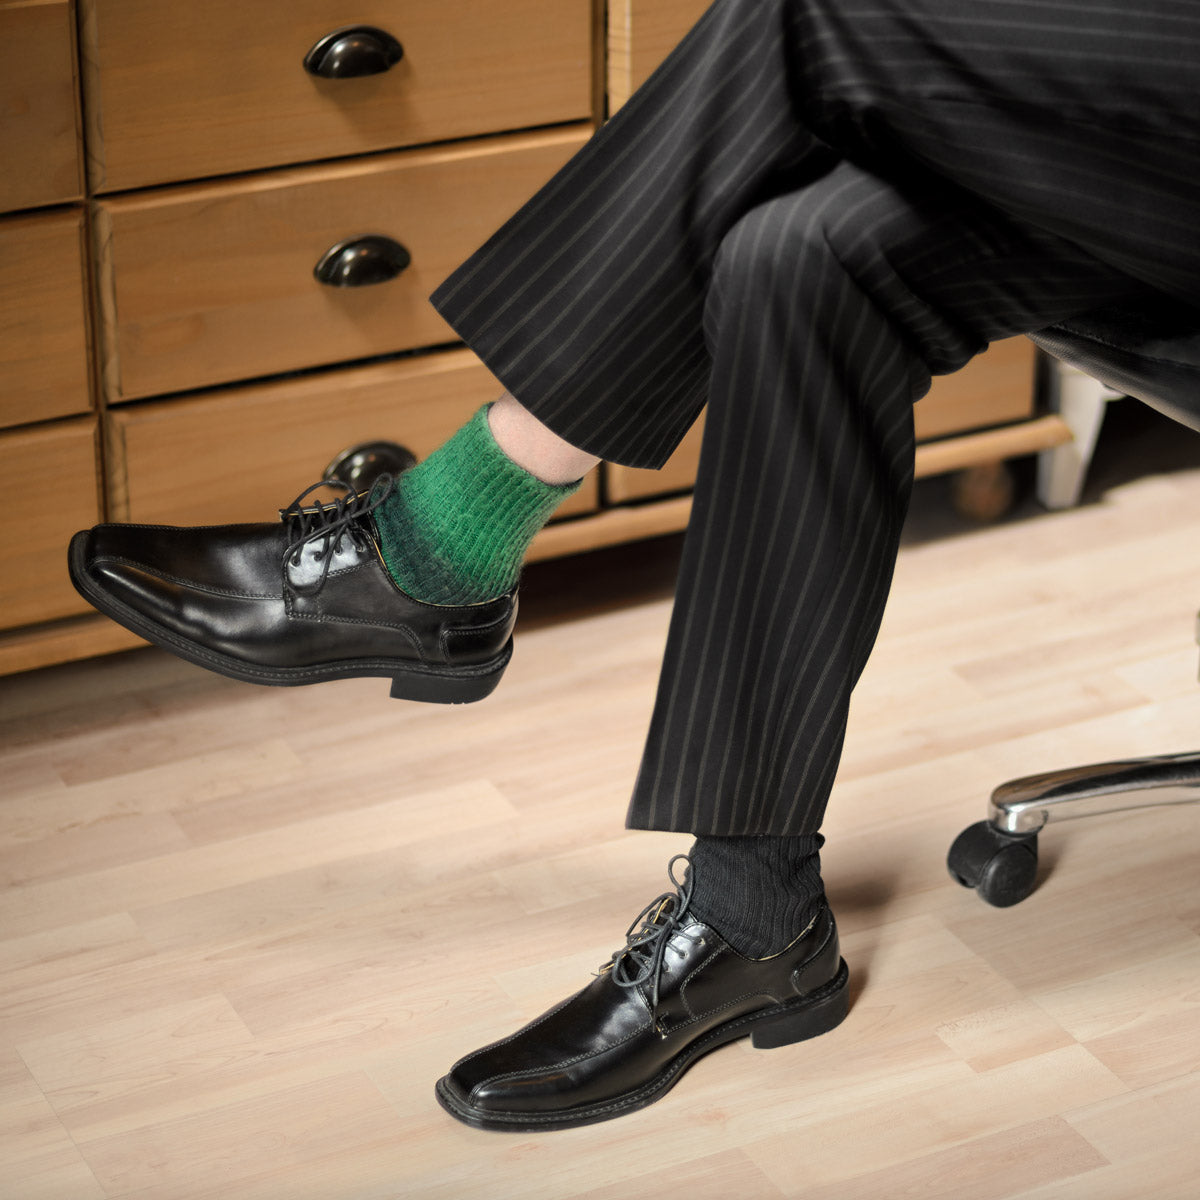 How to Wear Men's Dress Socks  The Definitive Guide to Sock Style - Cute  But Crazy Socks